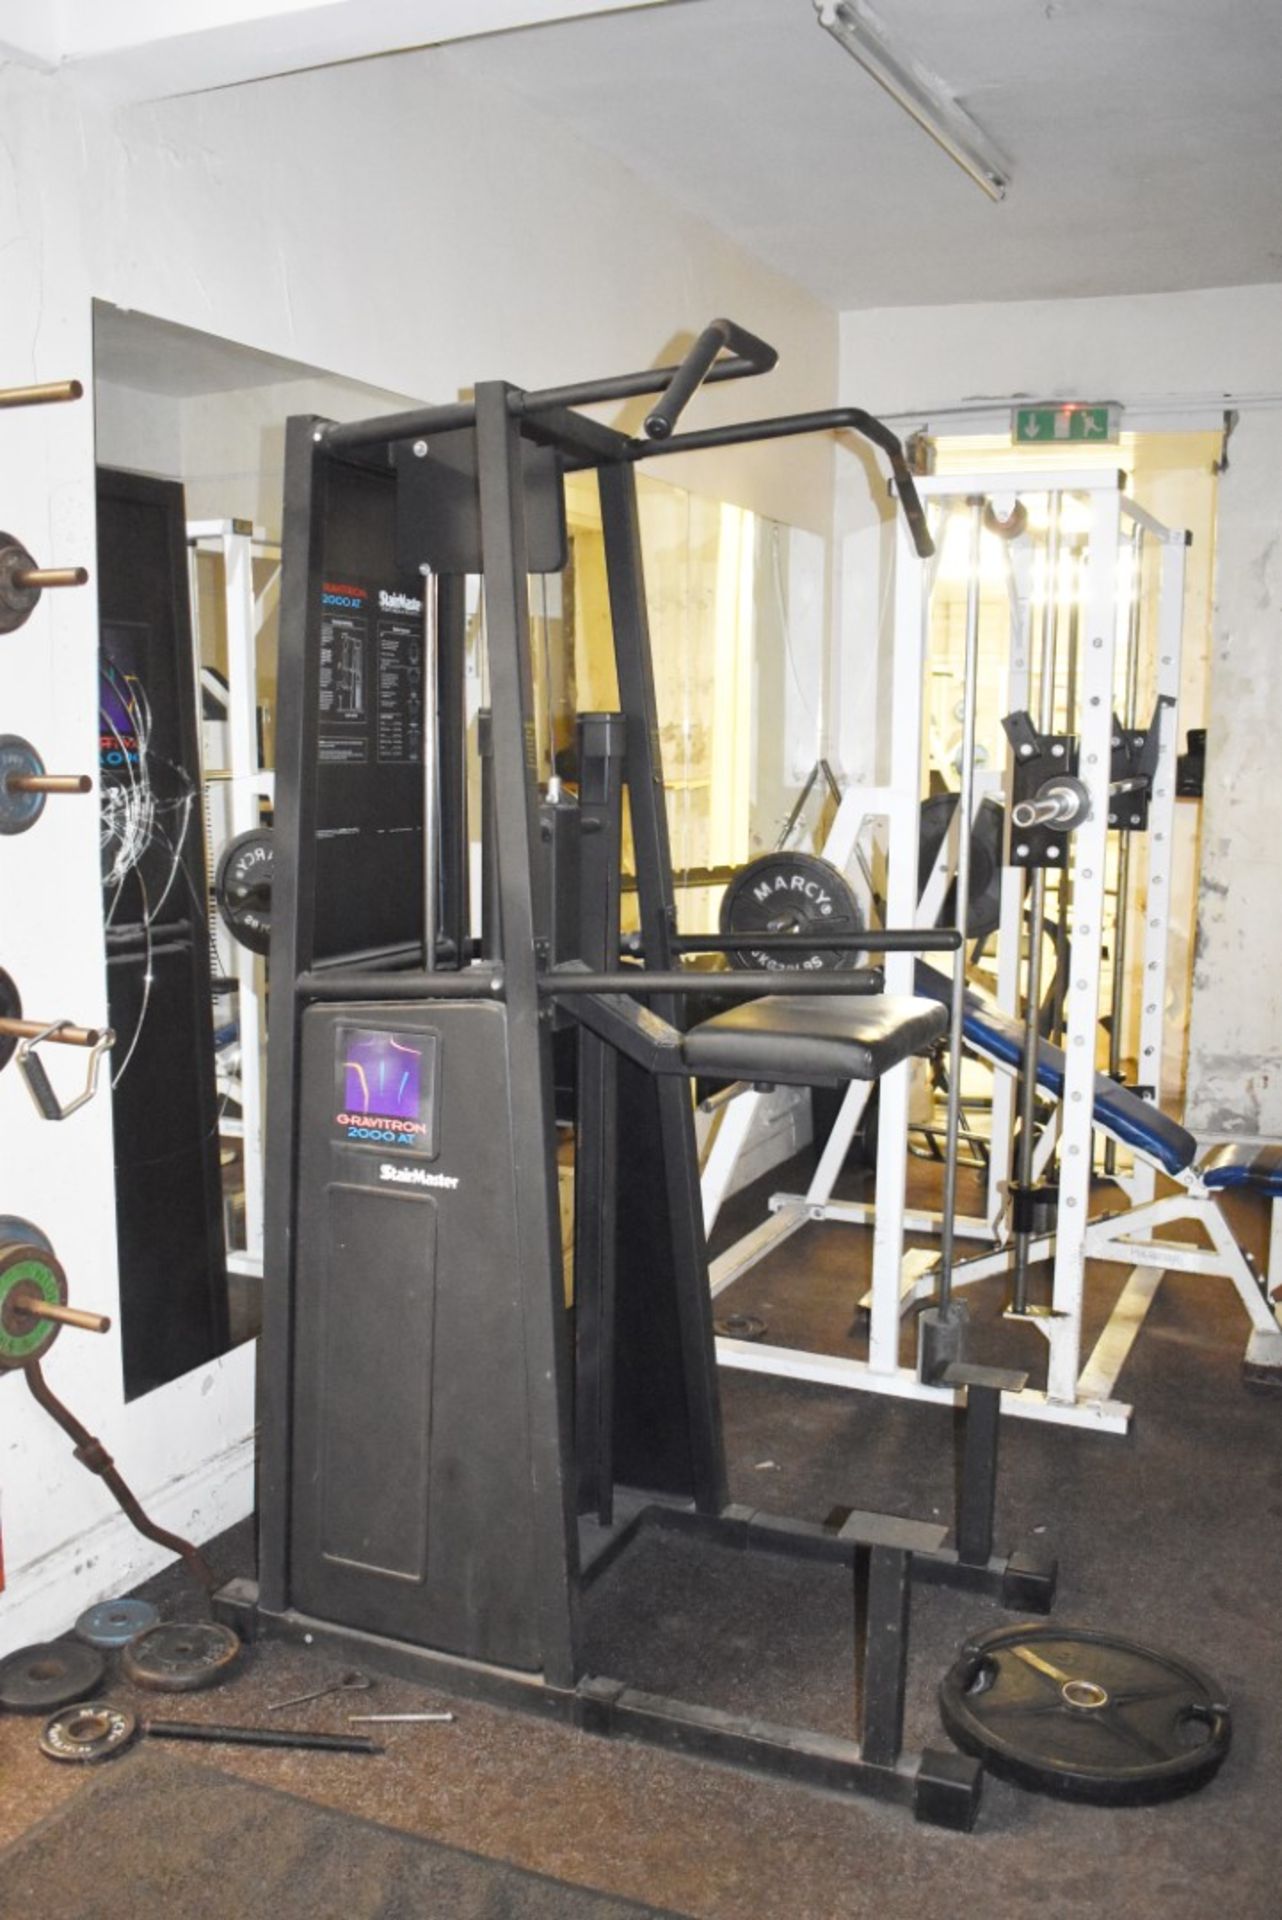 Contents of Bodybuilding and Strongman Gym - Includes Approx 30 Pieces of Gym Equipment, Floor Mats, - Image 23 of 95